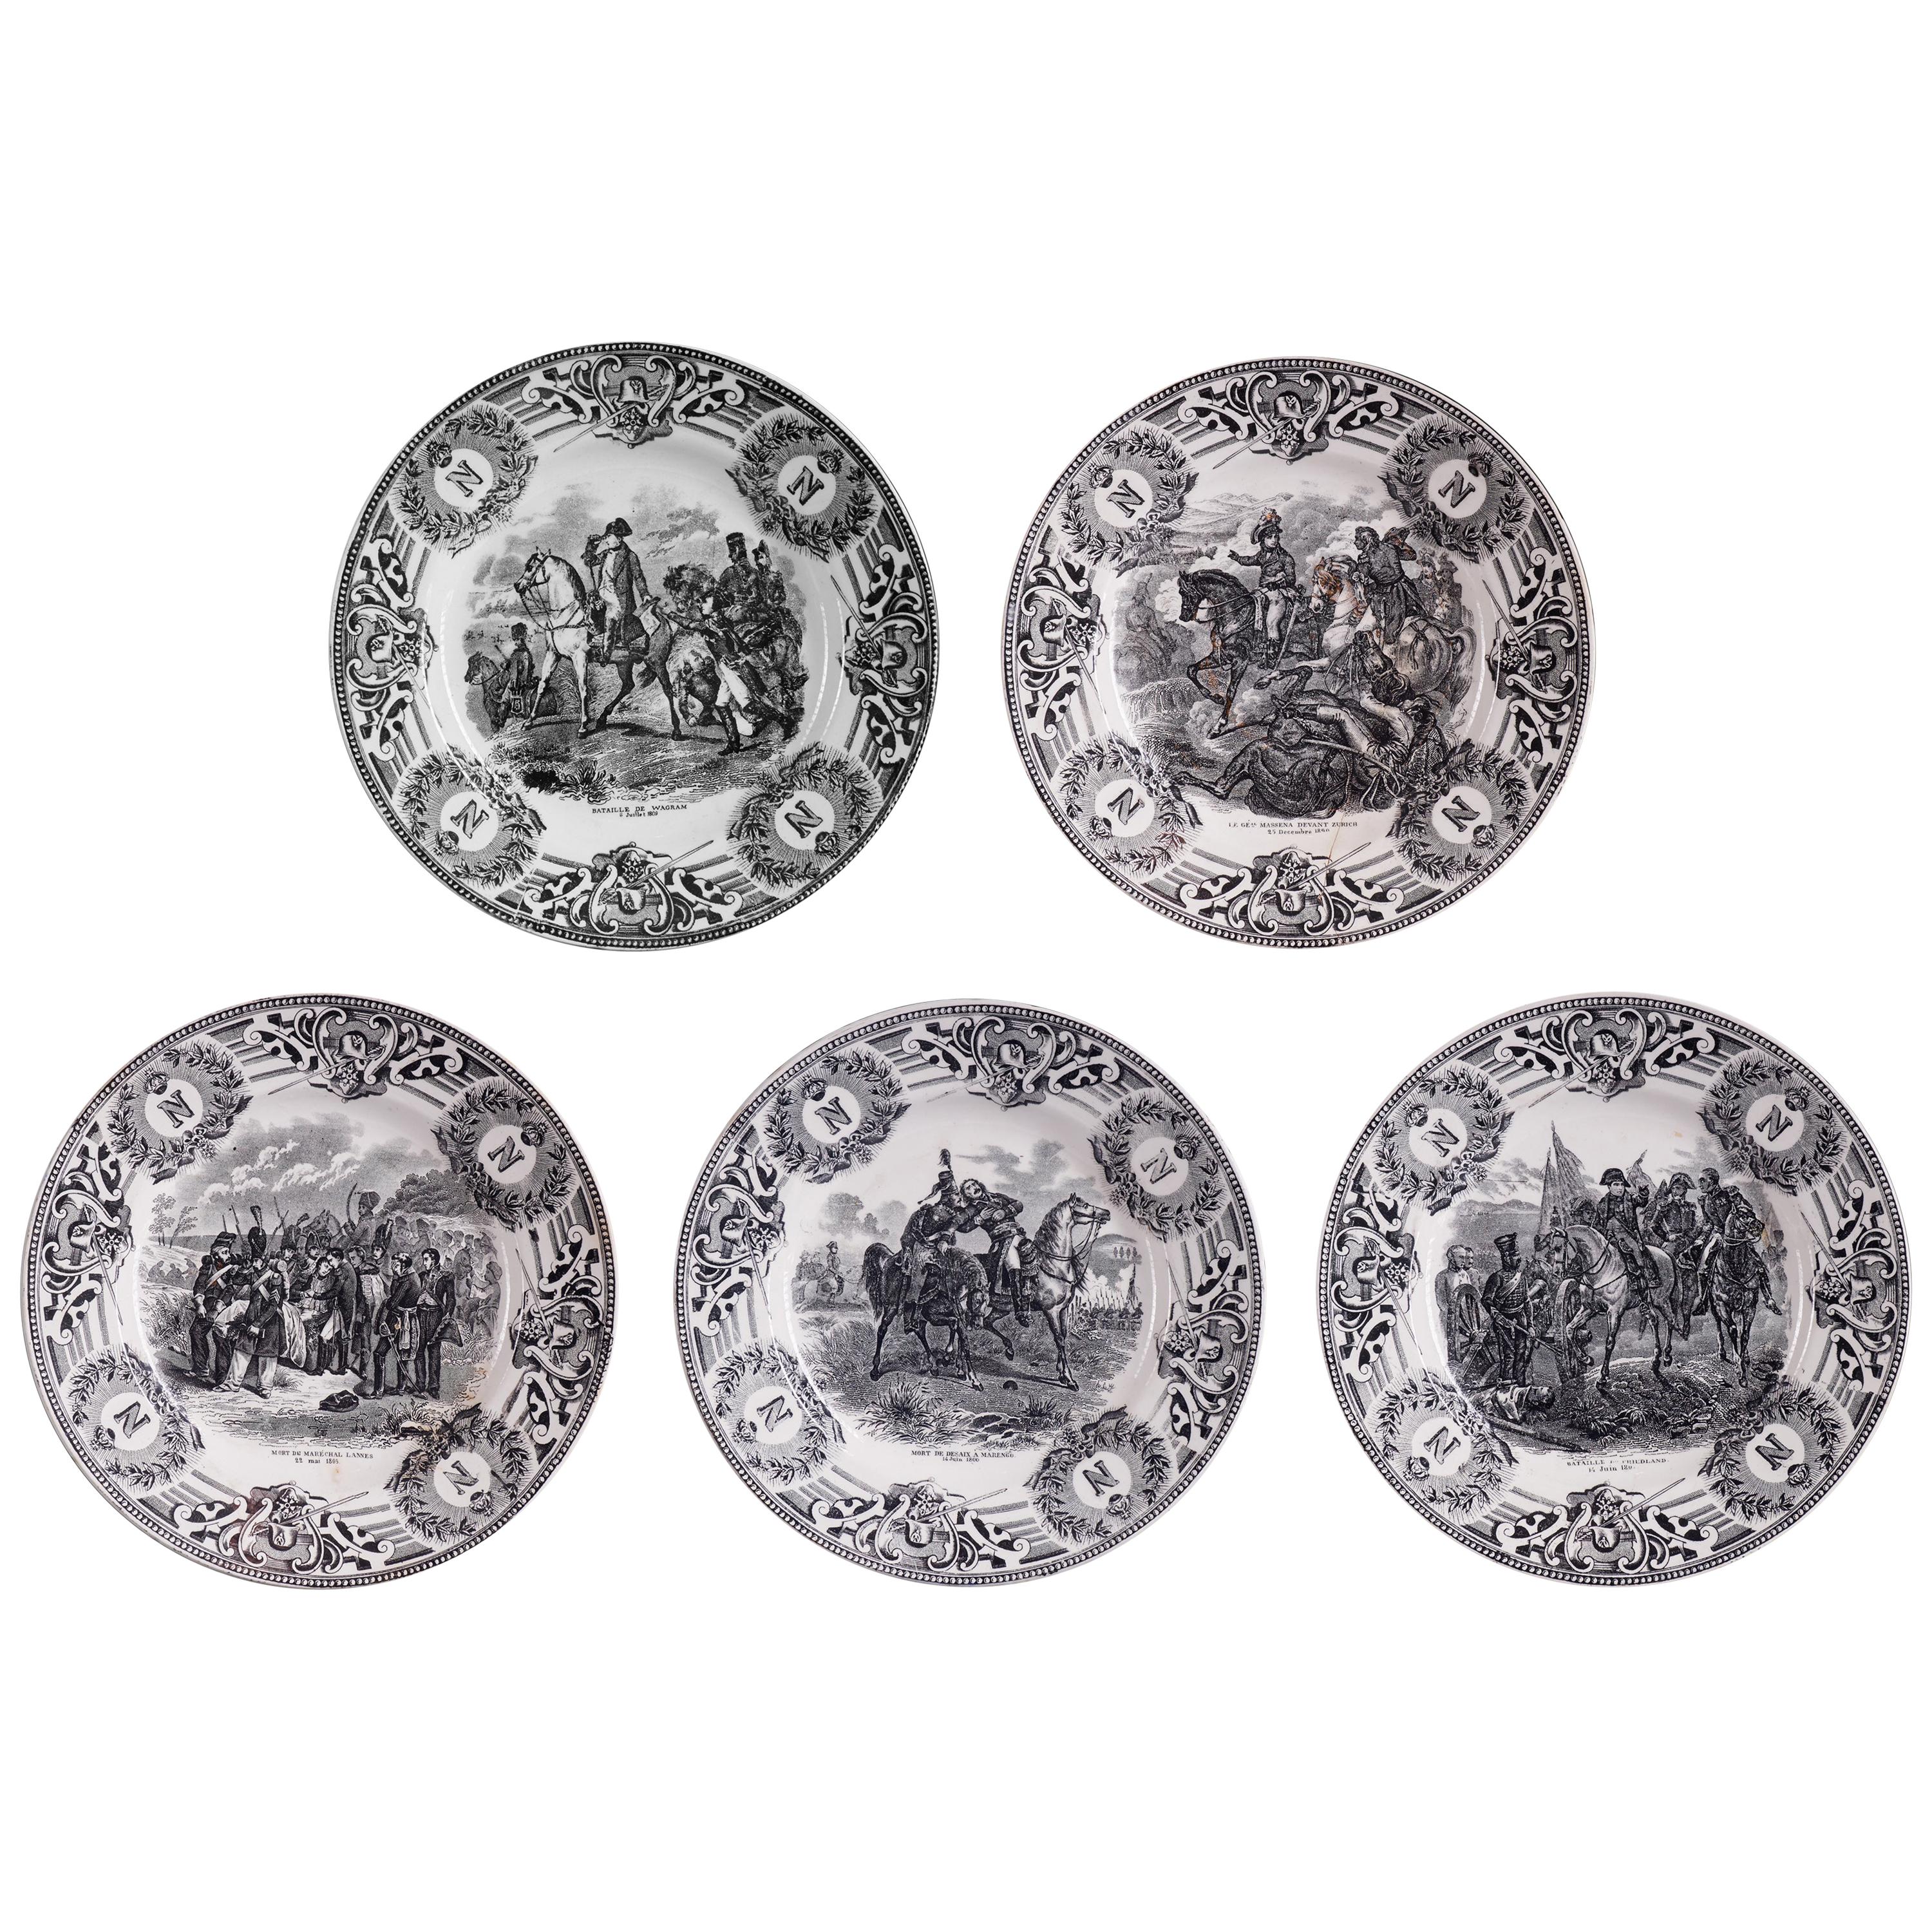 Very Elegant Set of 1930s White Faïence Plates with Black Designs